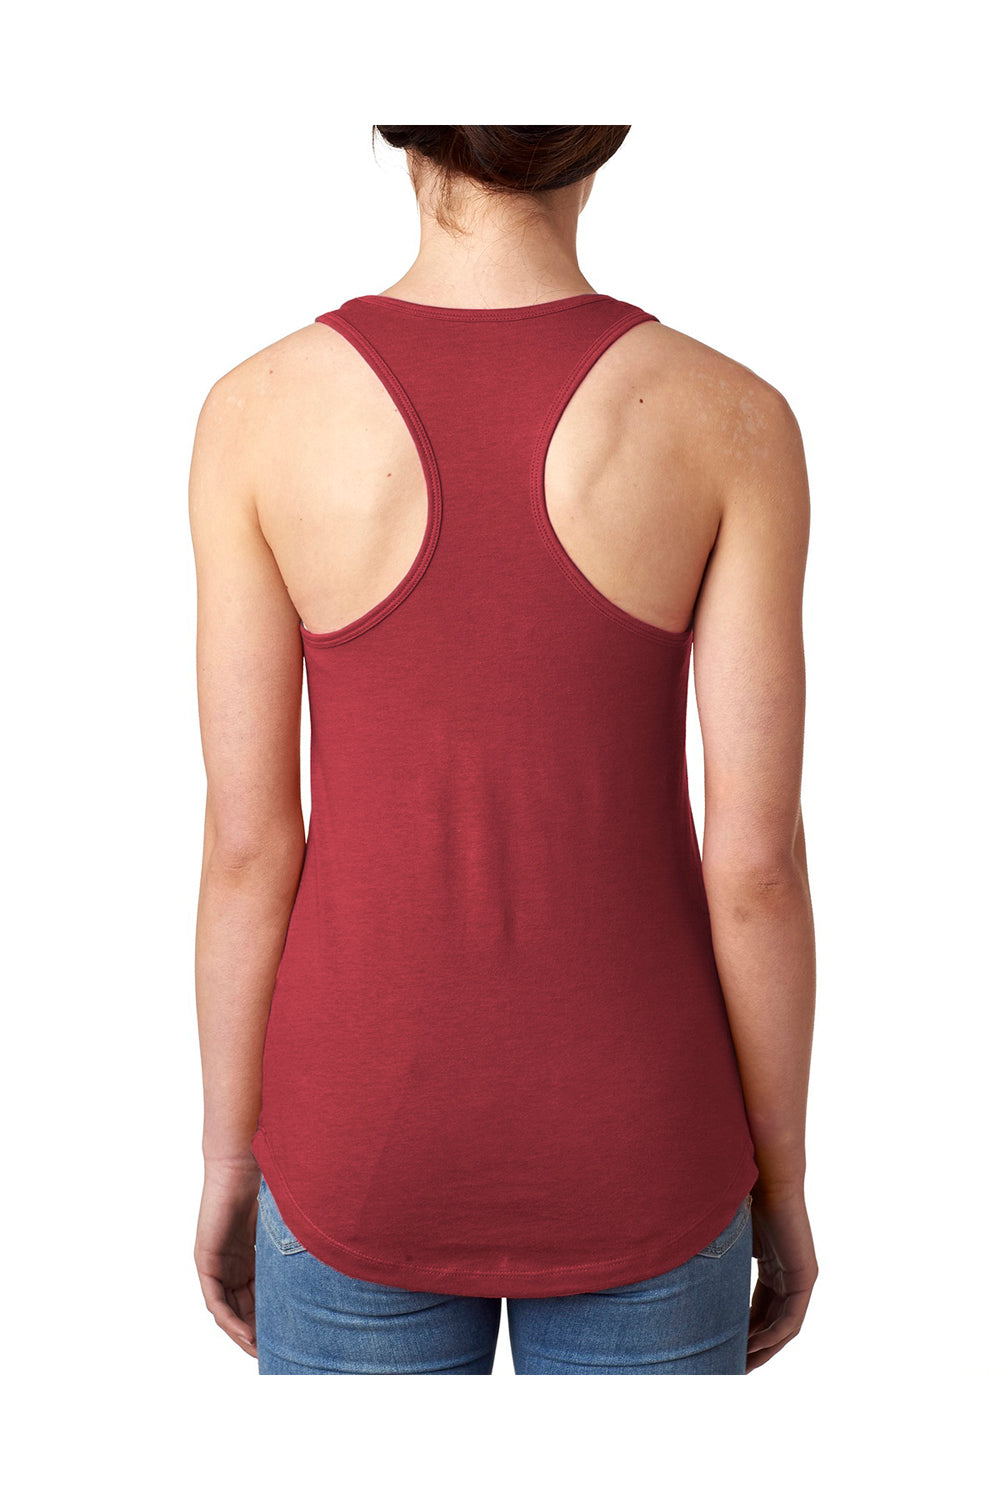 Next Level N1533 Womens Ideal Jersey Tank Top Scarlet Red Back